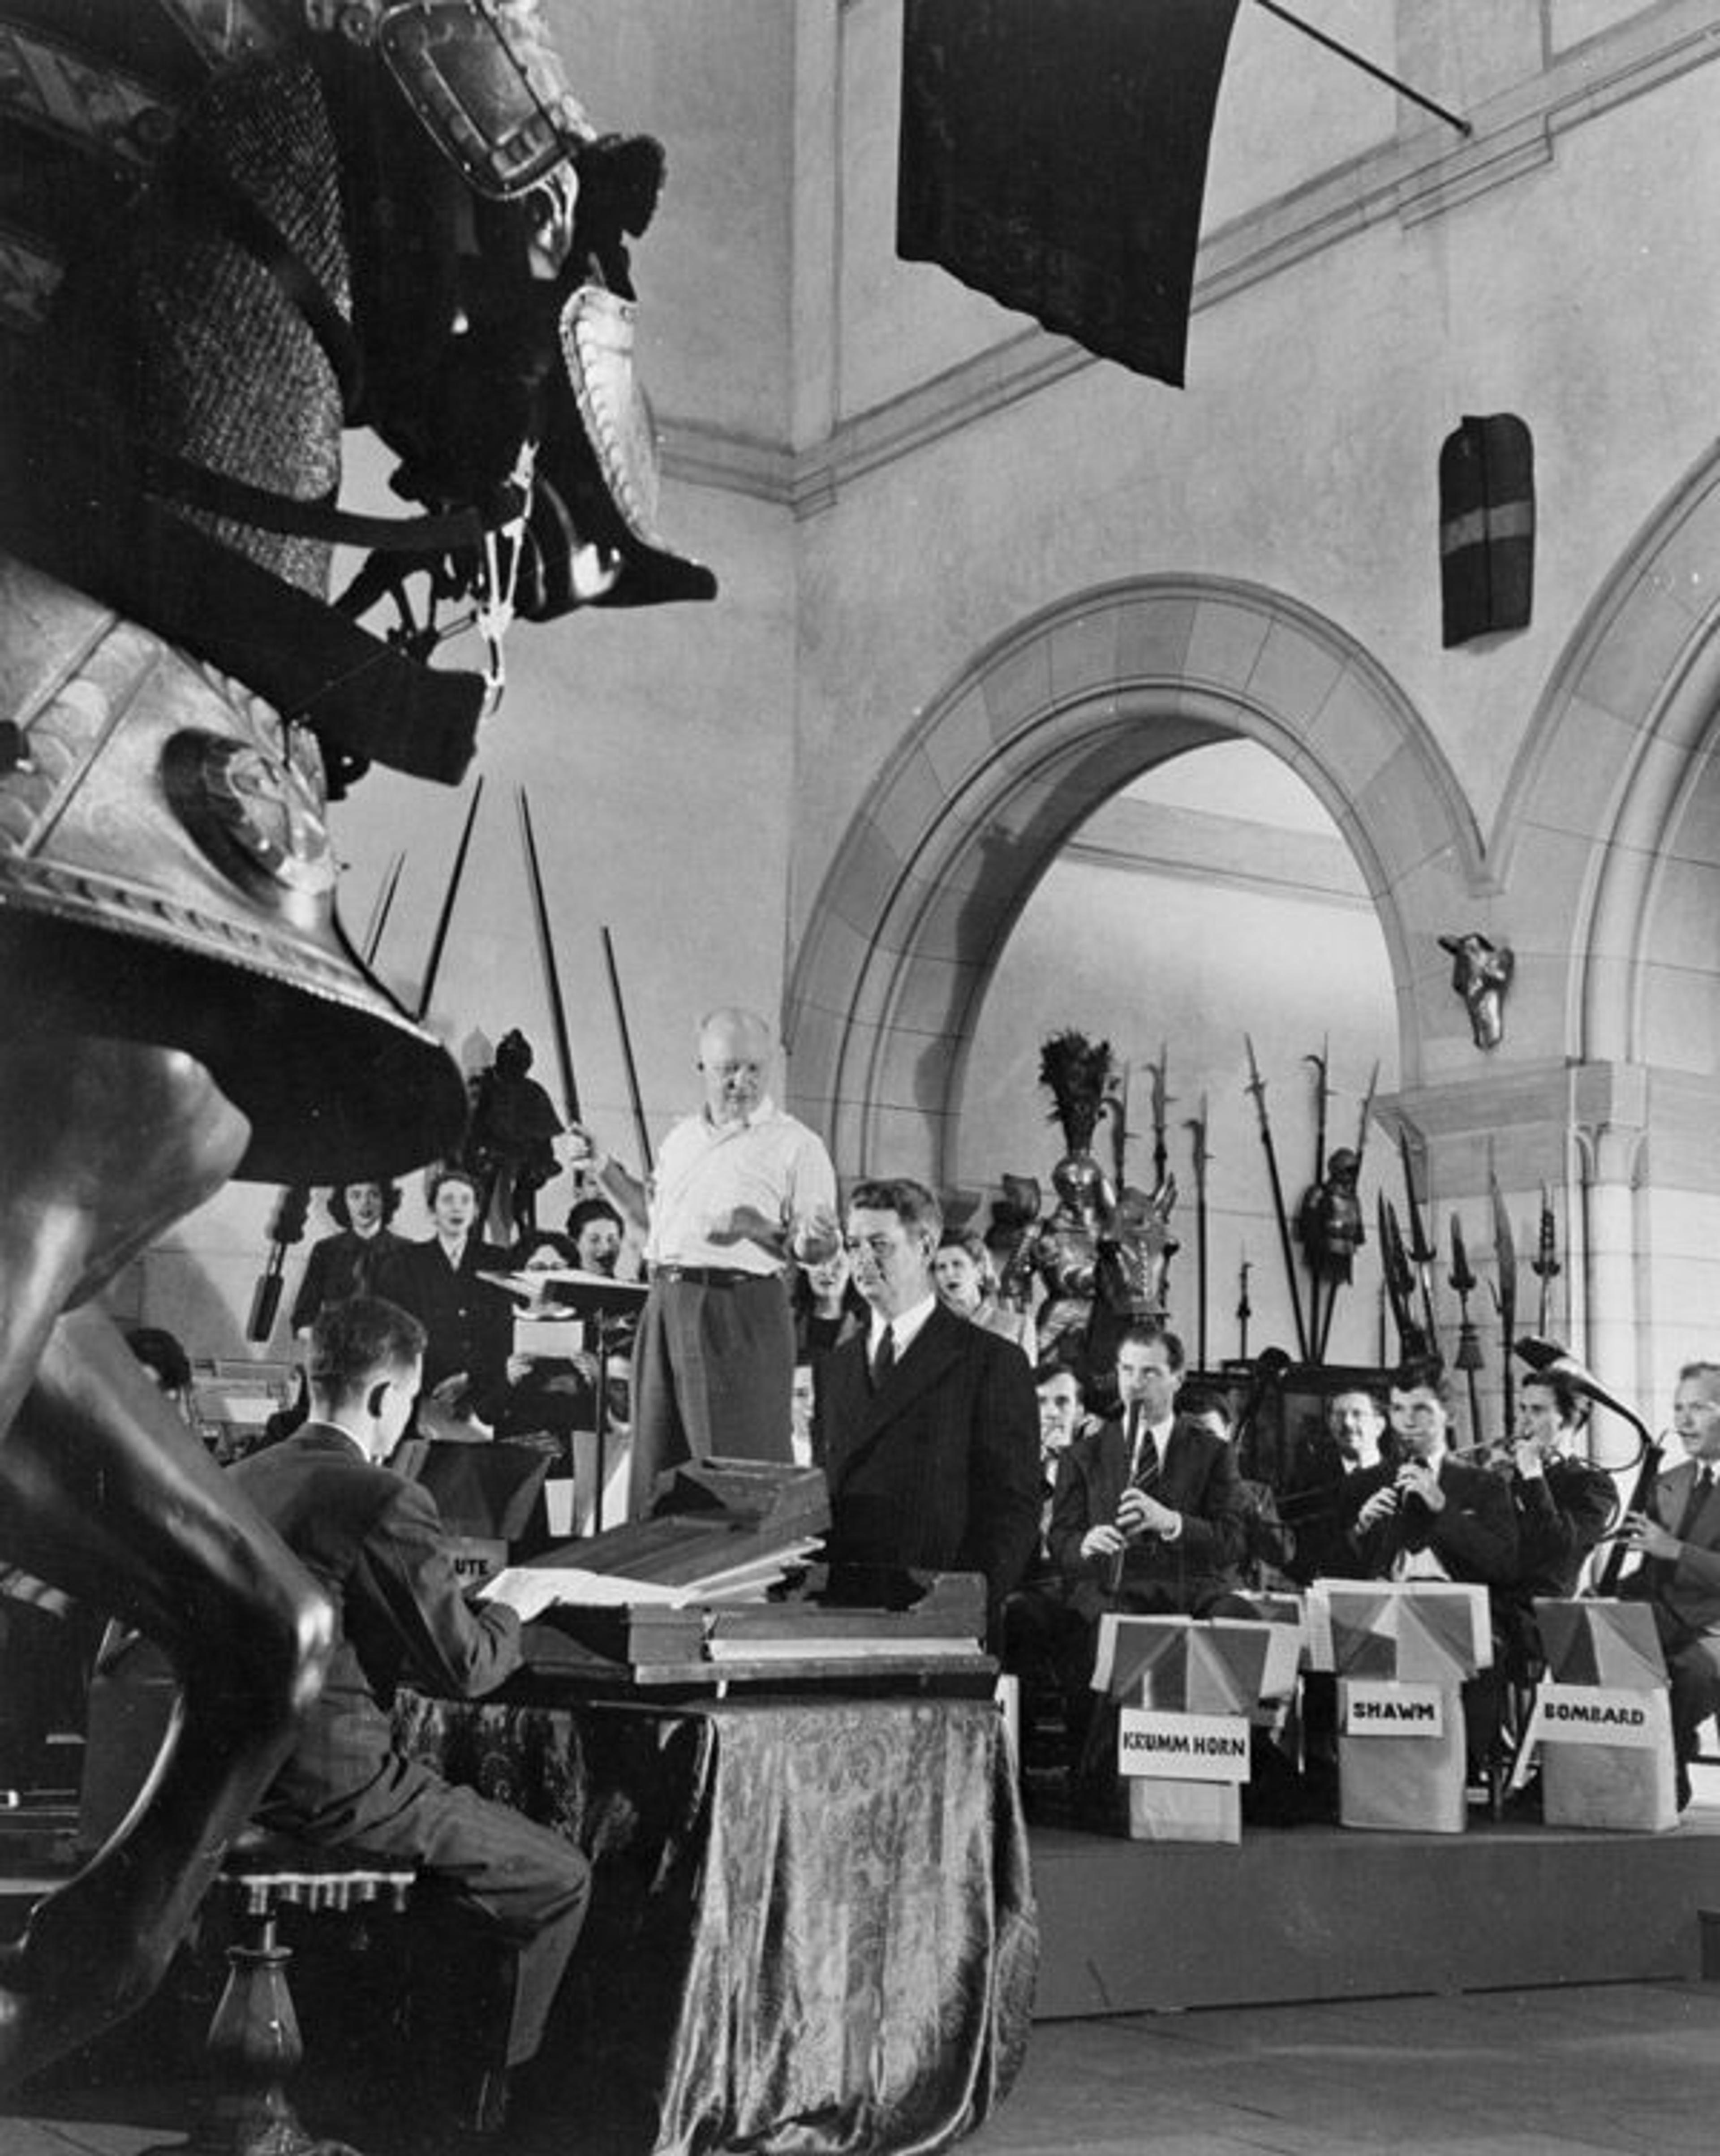 Hindemith and the Yale Collegium Musicum rehearsing in the Arms and Armor Court before their concert in May 1948. The seldom-heard early instruments are labeled "shawm," "krummhorn," etc. for the benefit of the audience. The State Department recorded this concert for the Voice of America, which continued to record and disseminate Winternitz’s Member concerts until at least 1955.